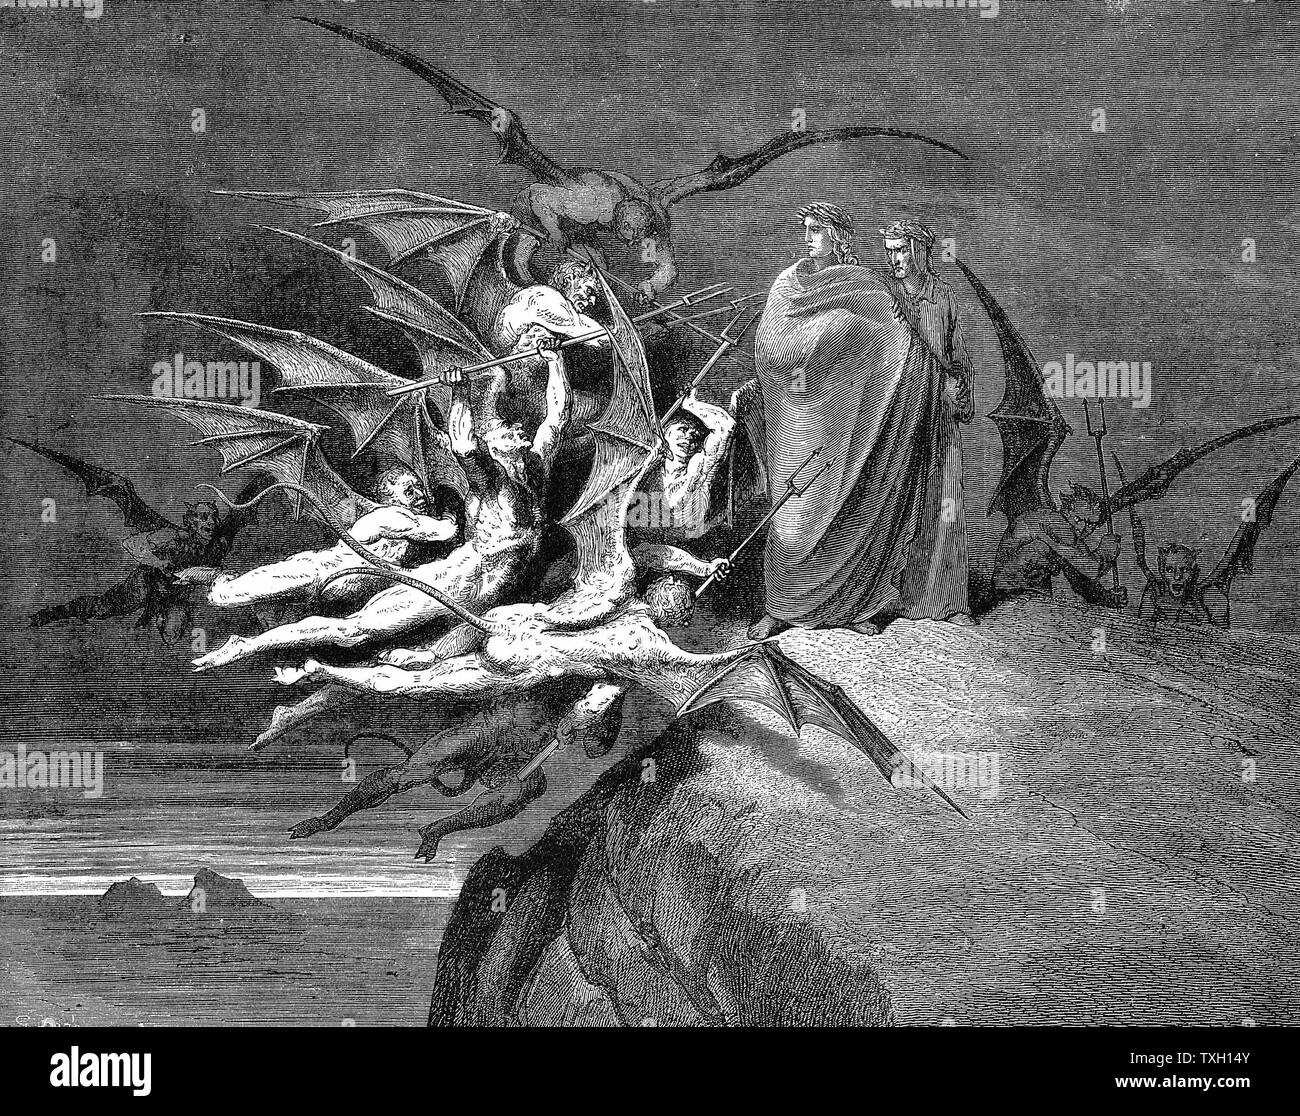 Inferno v Black and White Stock Photos & Images - Alamy